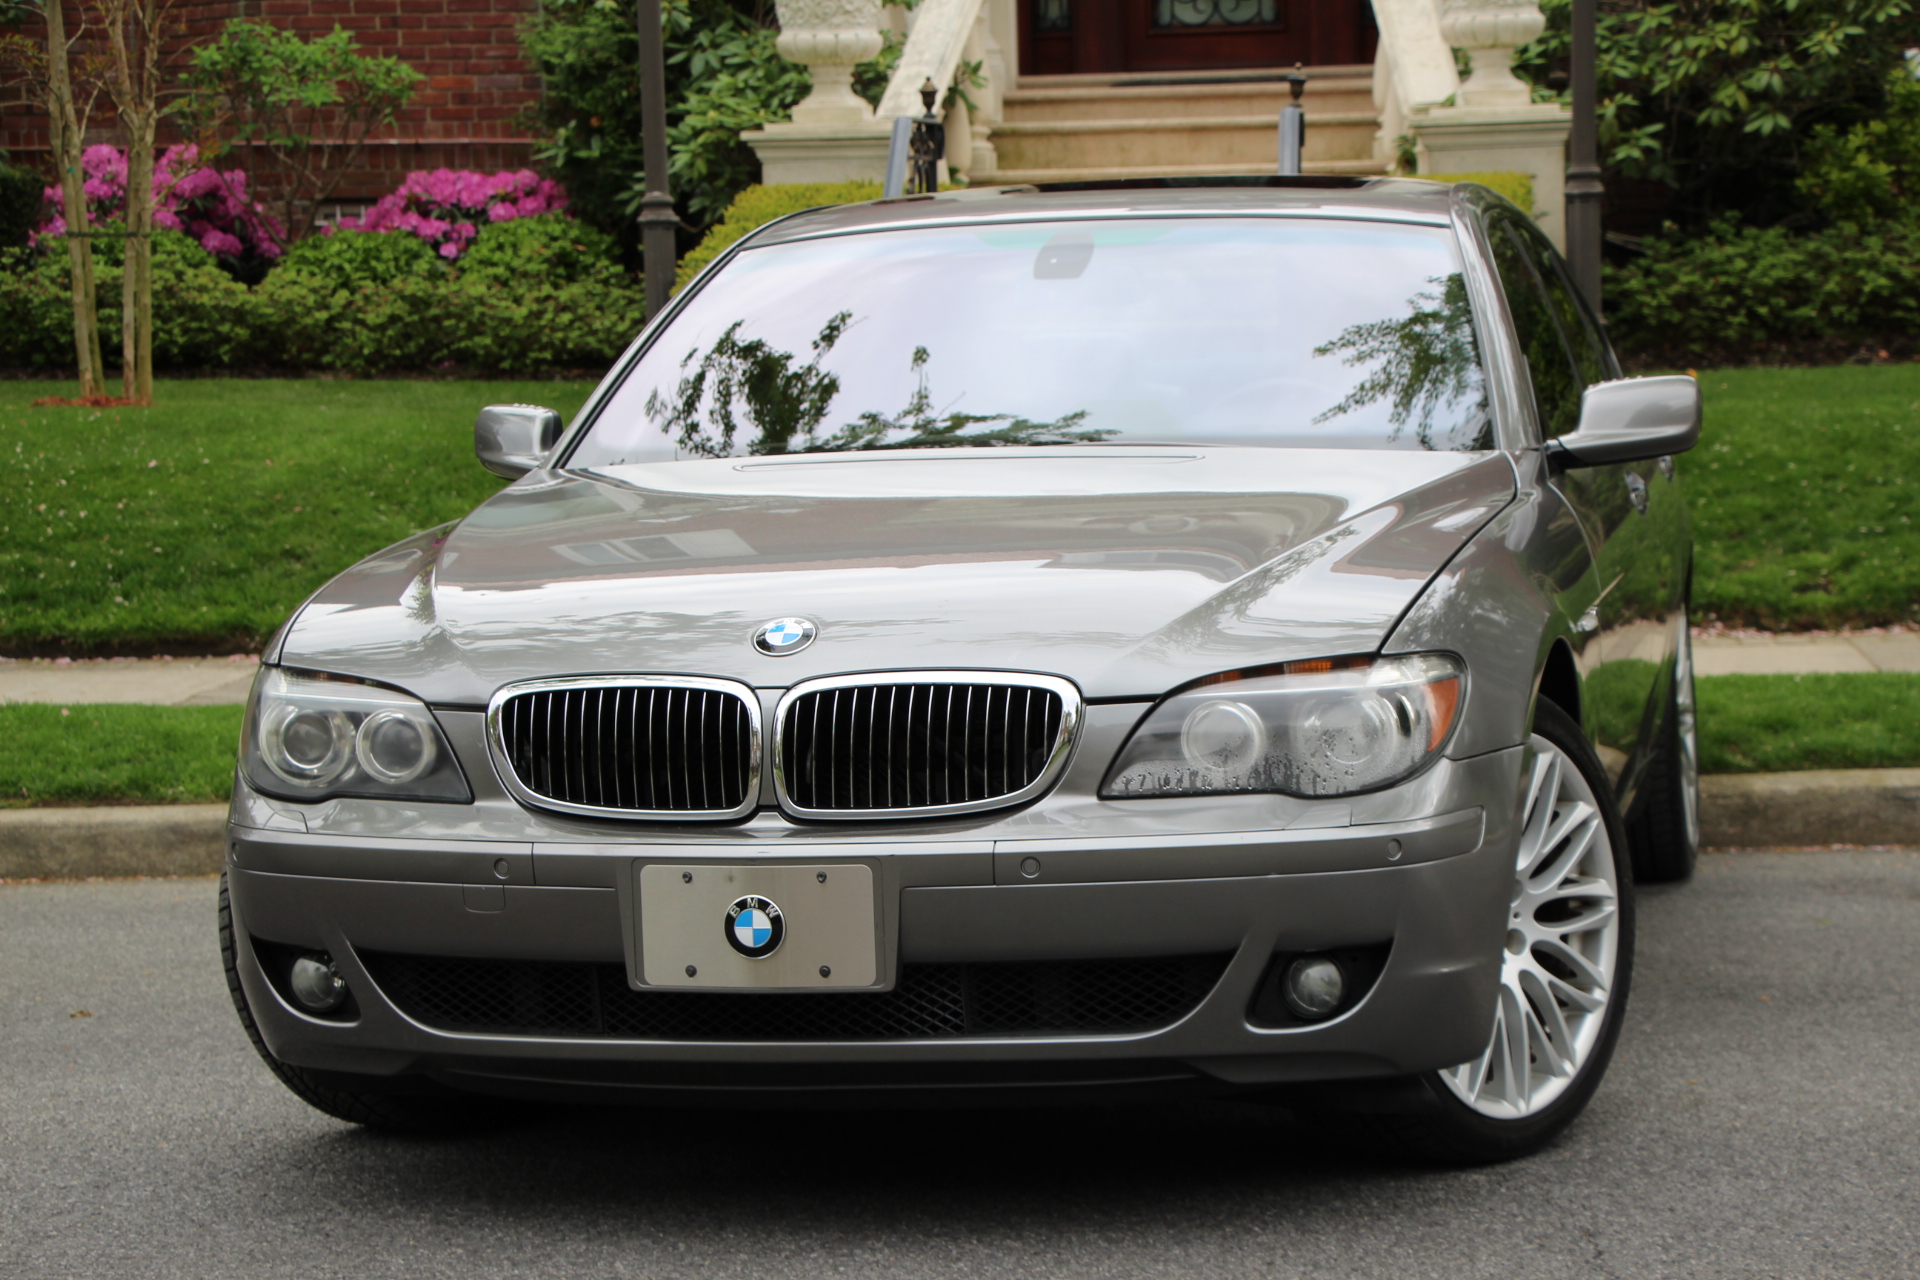 Buy Used 2006 BMW 760I SPORT for $11 900 from trusted dealer in Brooklyn,  NY!